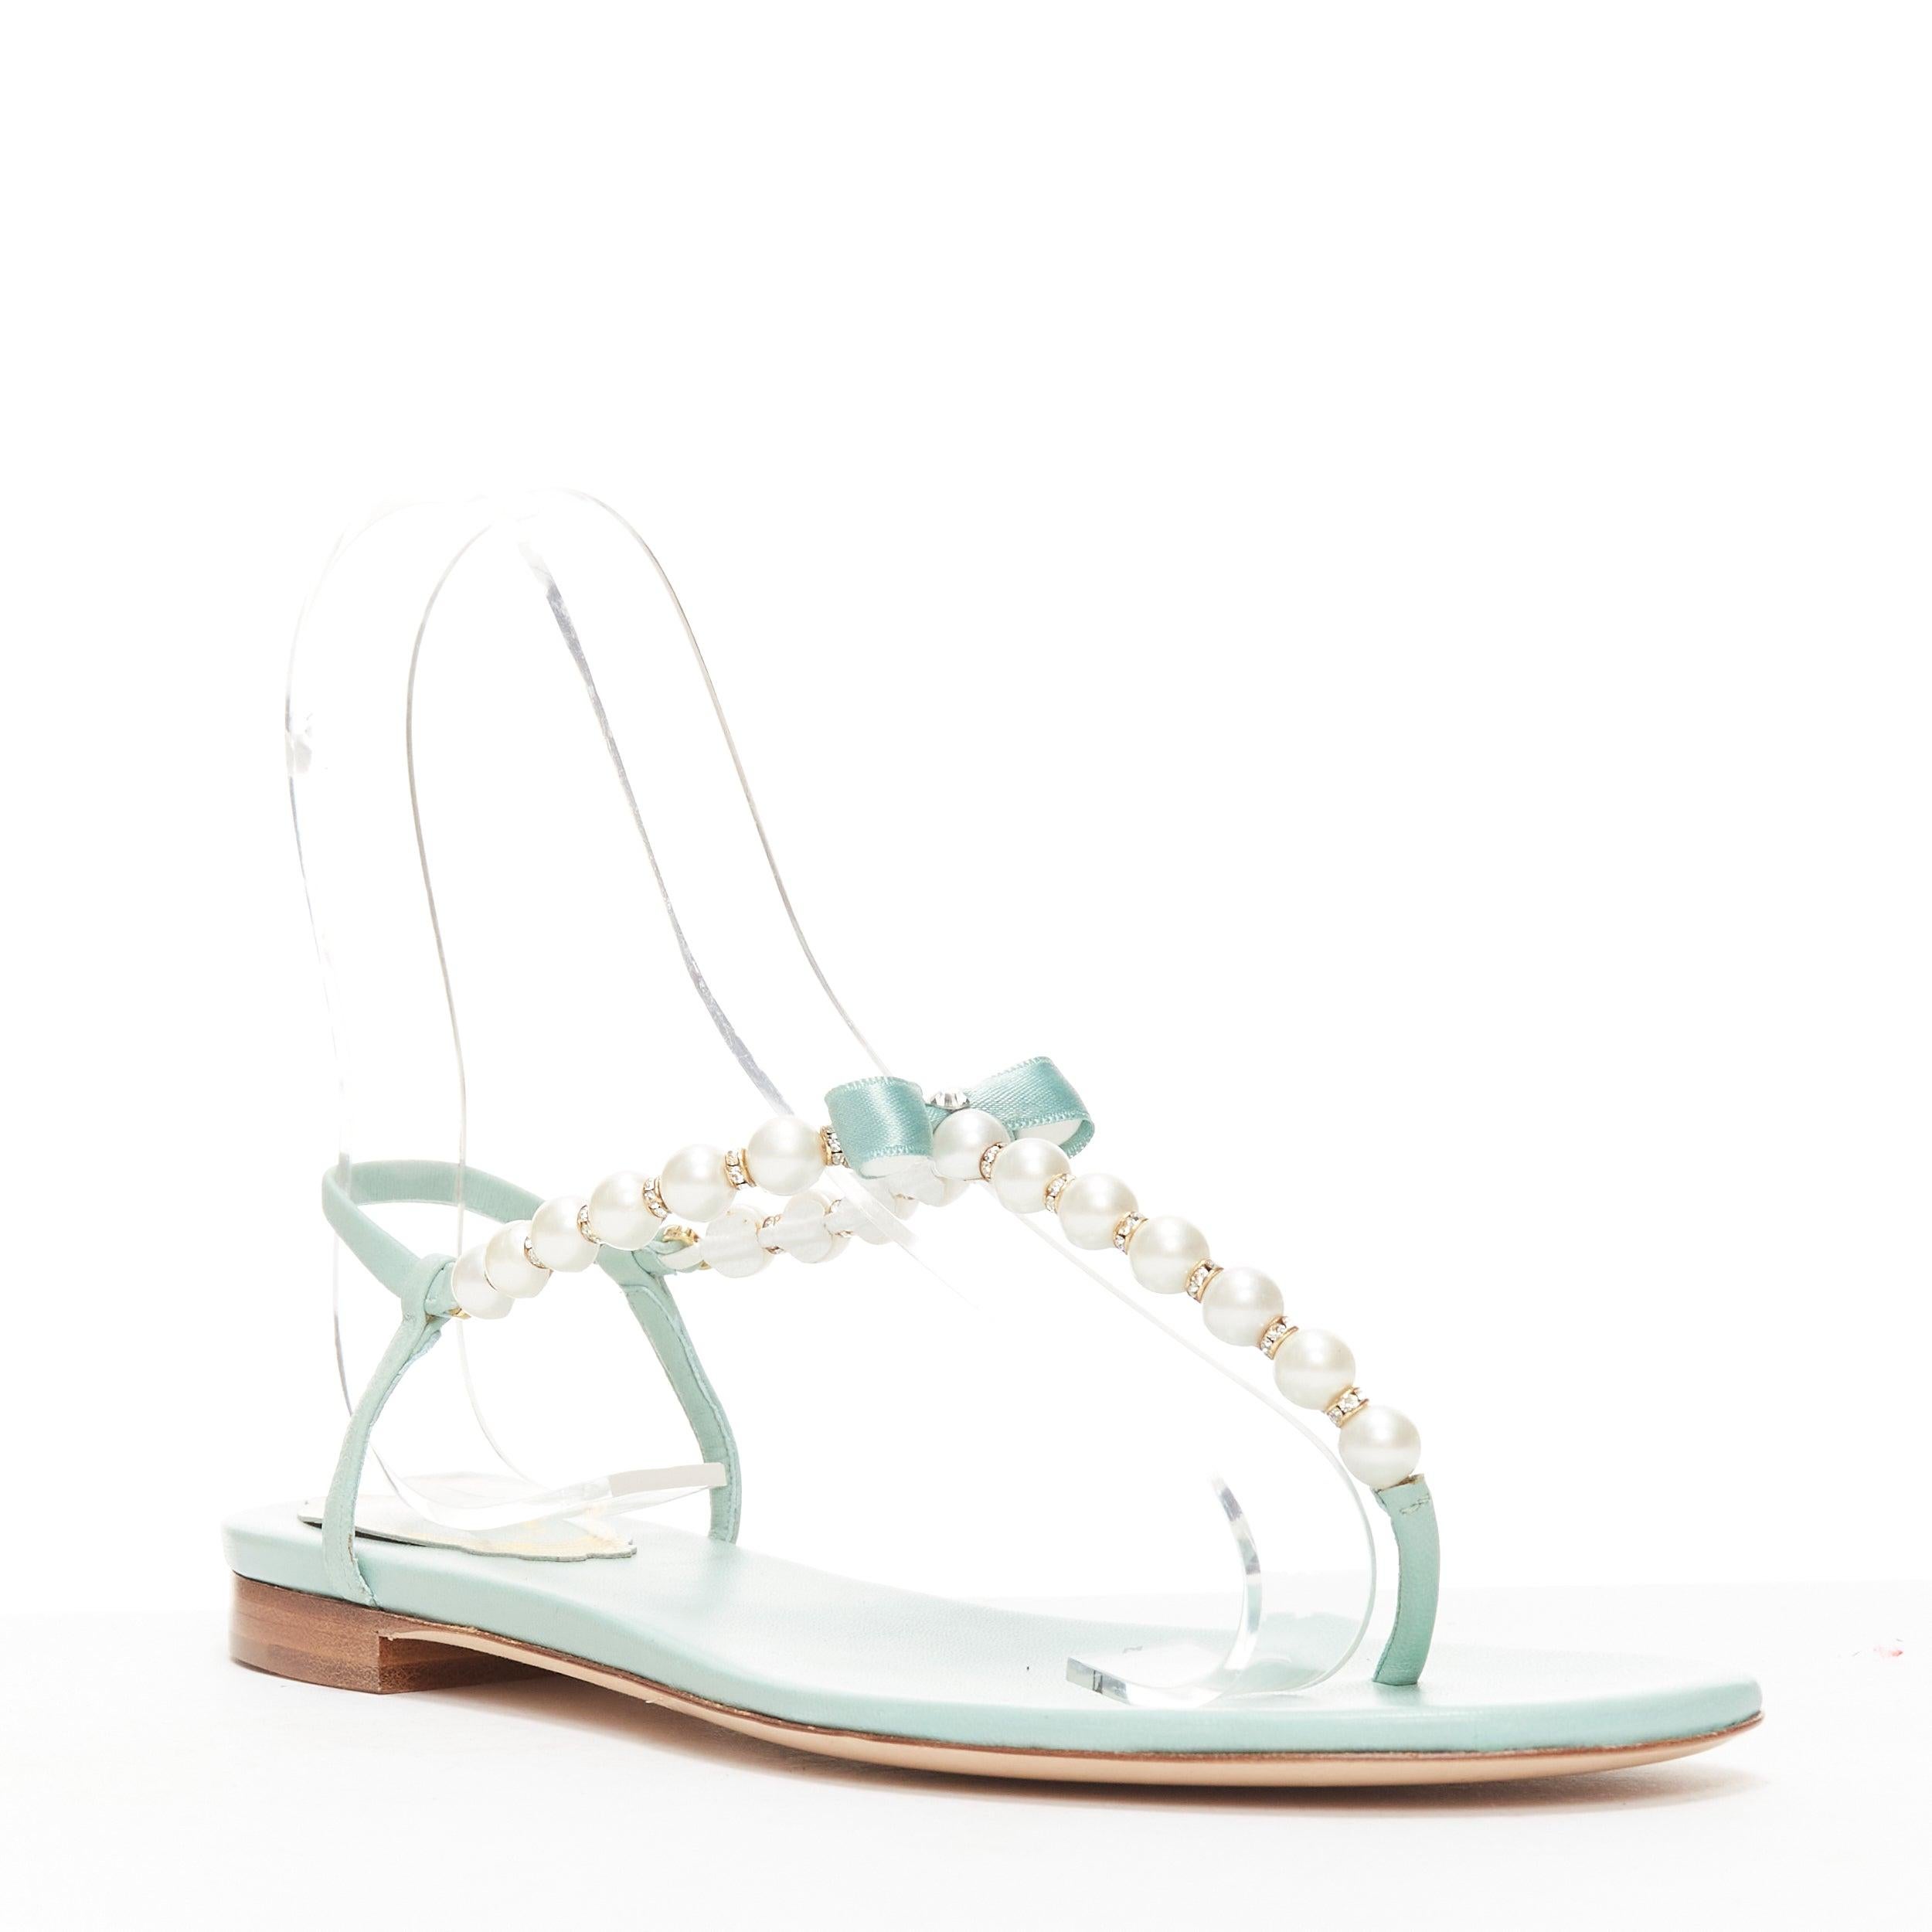 RENE CAOVILLA teal leather bow crystal pearl tstrap flat sandals EU37
Reference: KYCG/A00050
Brand: Rene Caovilla
Material: Leather, Faux Pearl, Fabric
Color: Green, Pearl
Pattern: Solid
Closure: Elasticated
Lining: Green Leather
Extra Details: